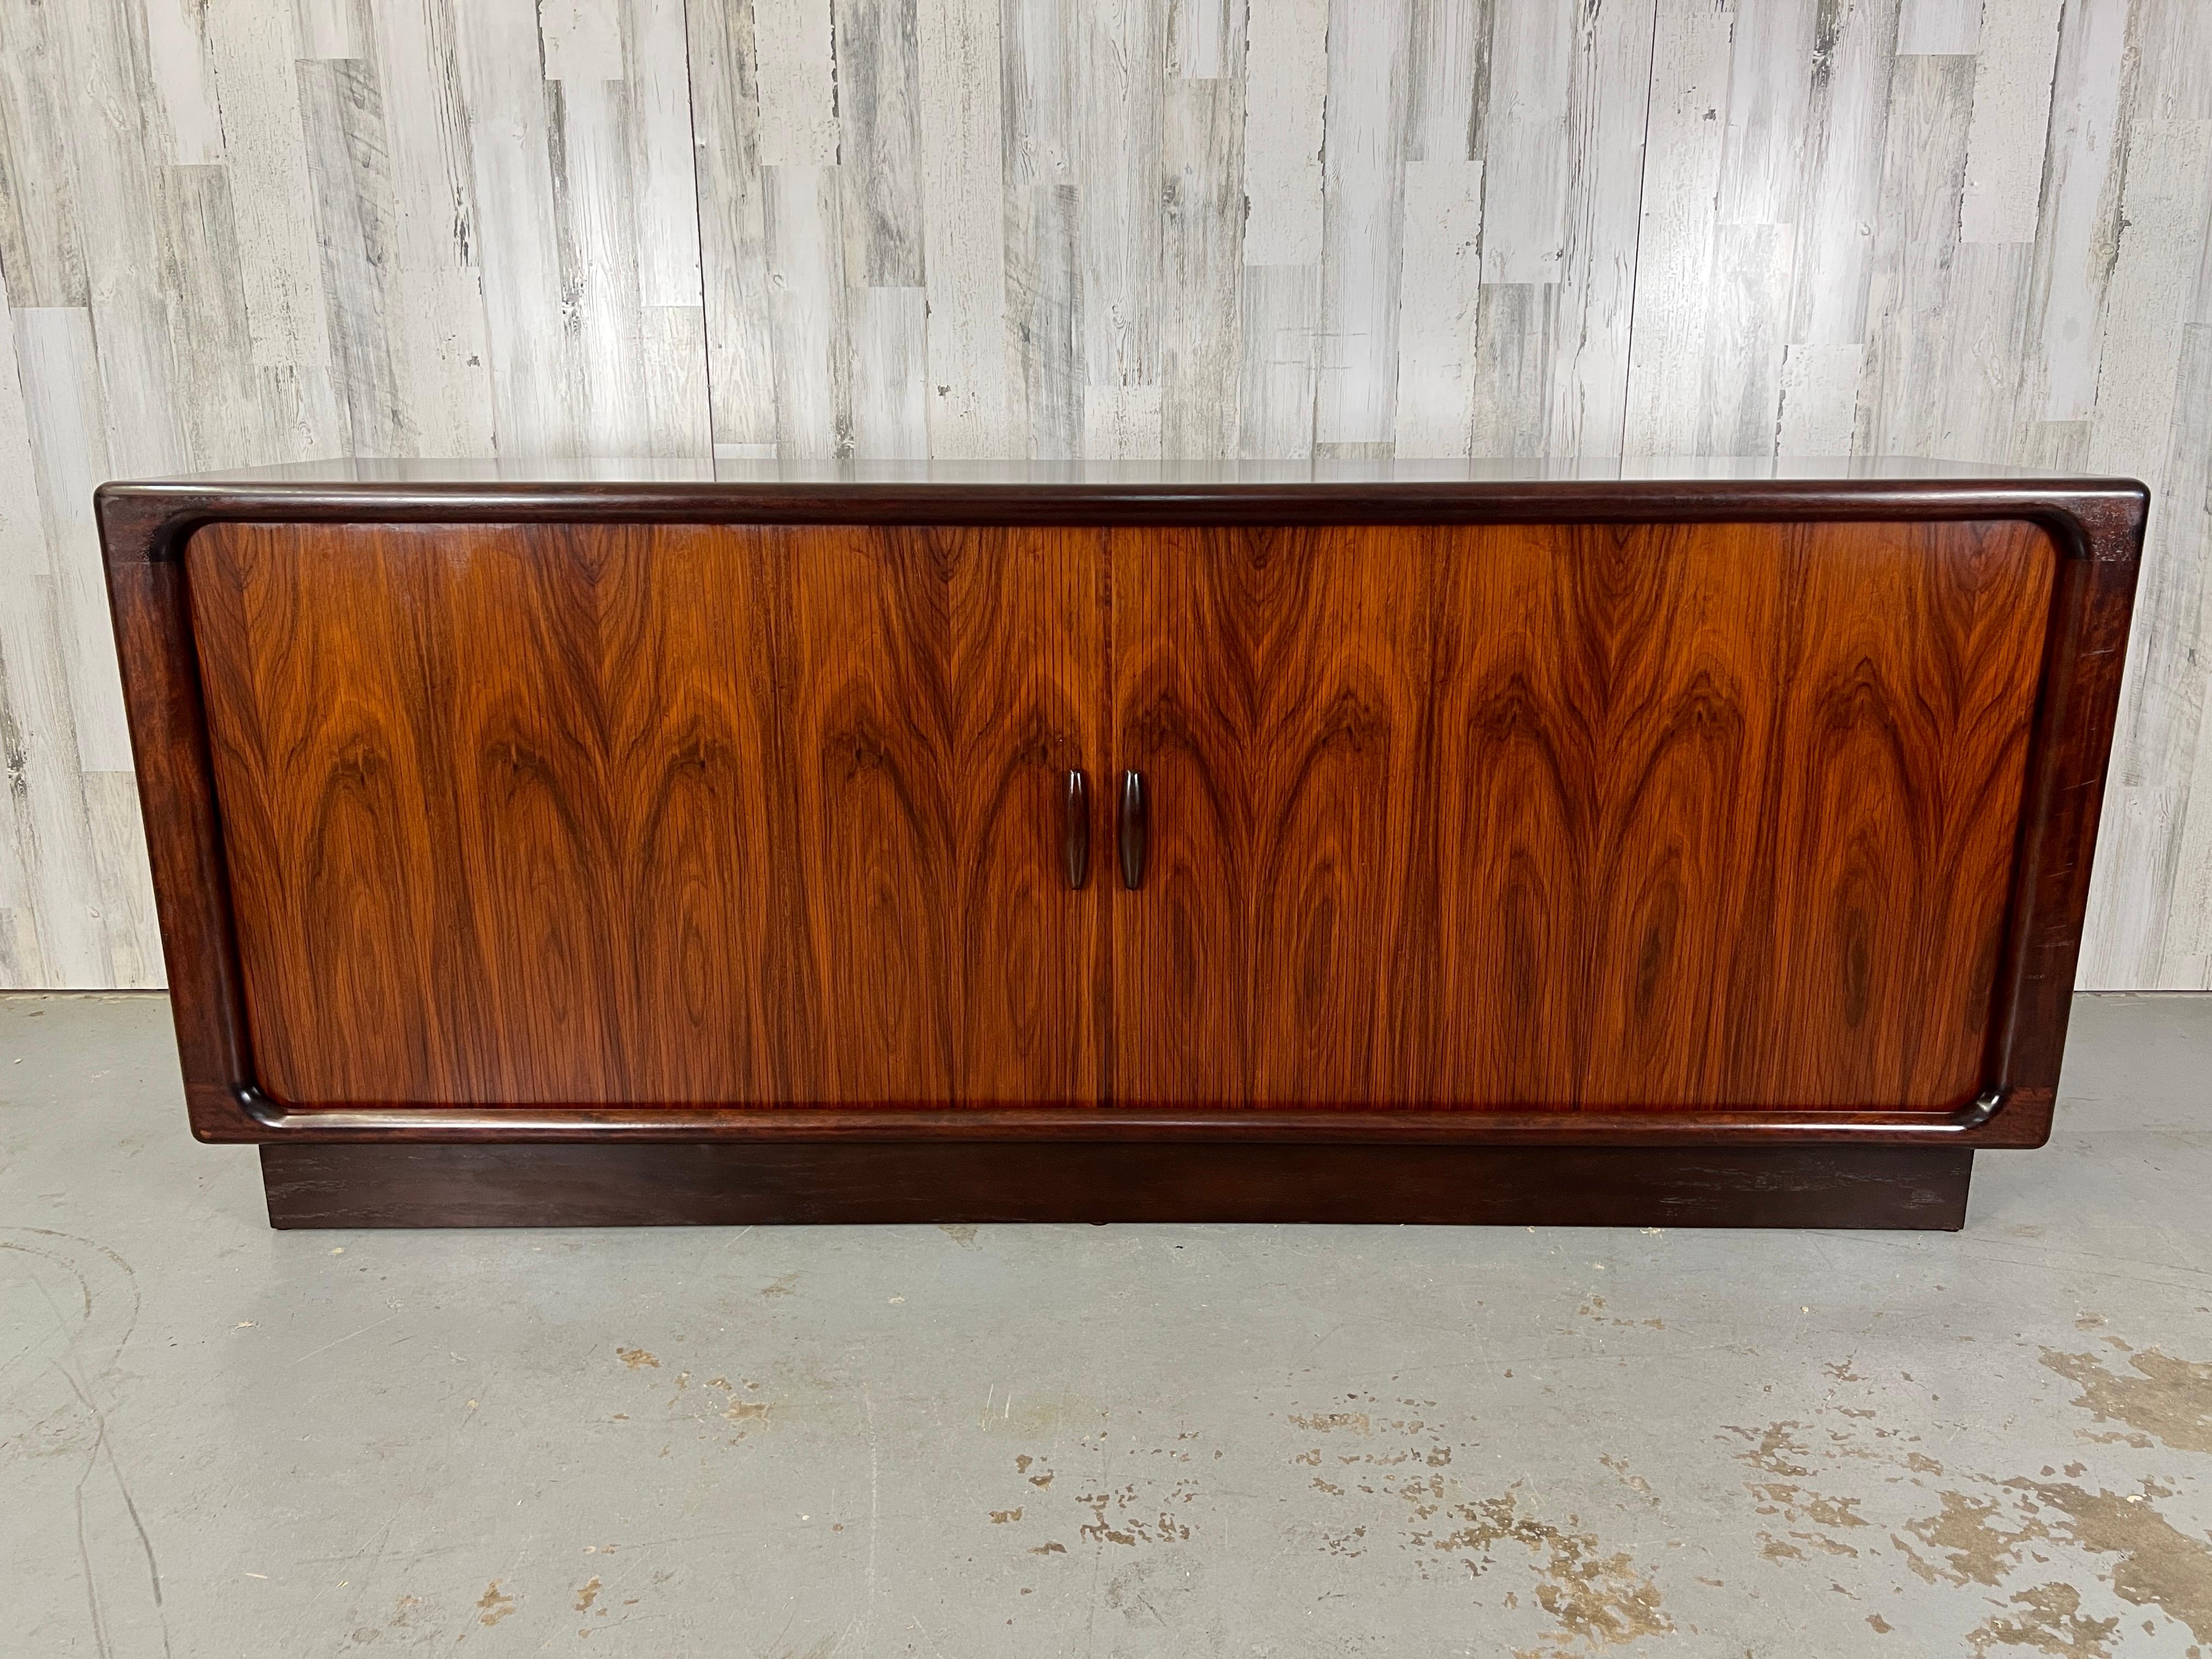 Rare Danish modern rosewood tambour door credenza with center dovetailed drawer section and adjustable shelf on each side.